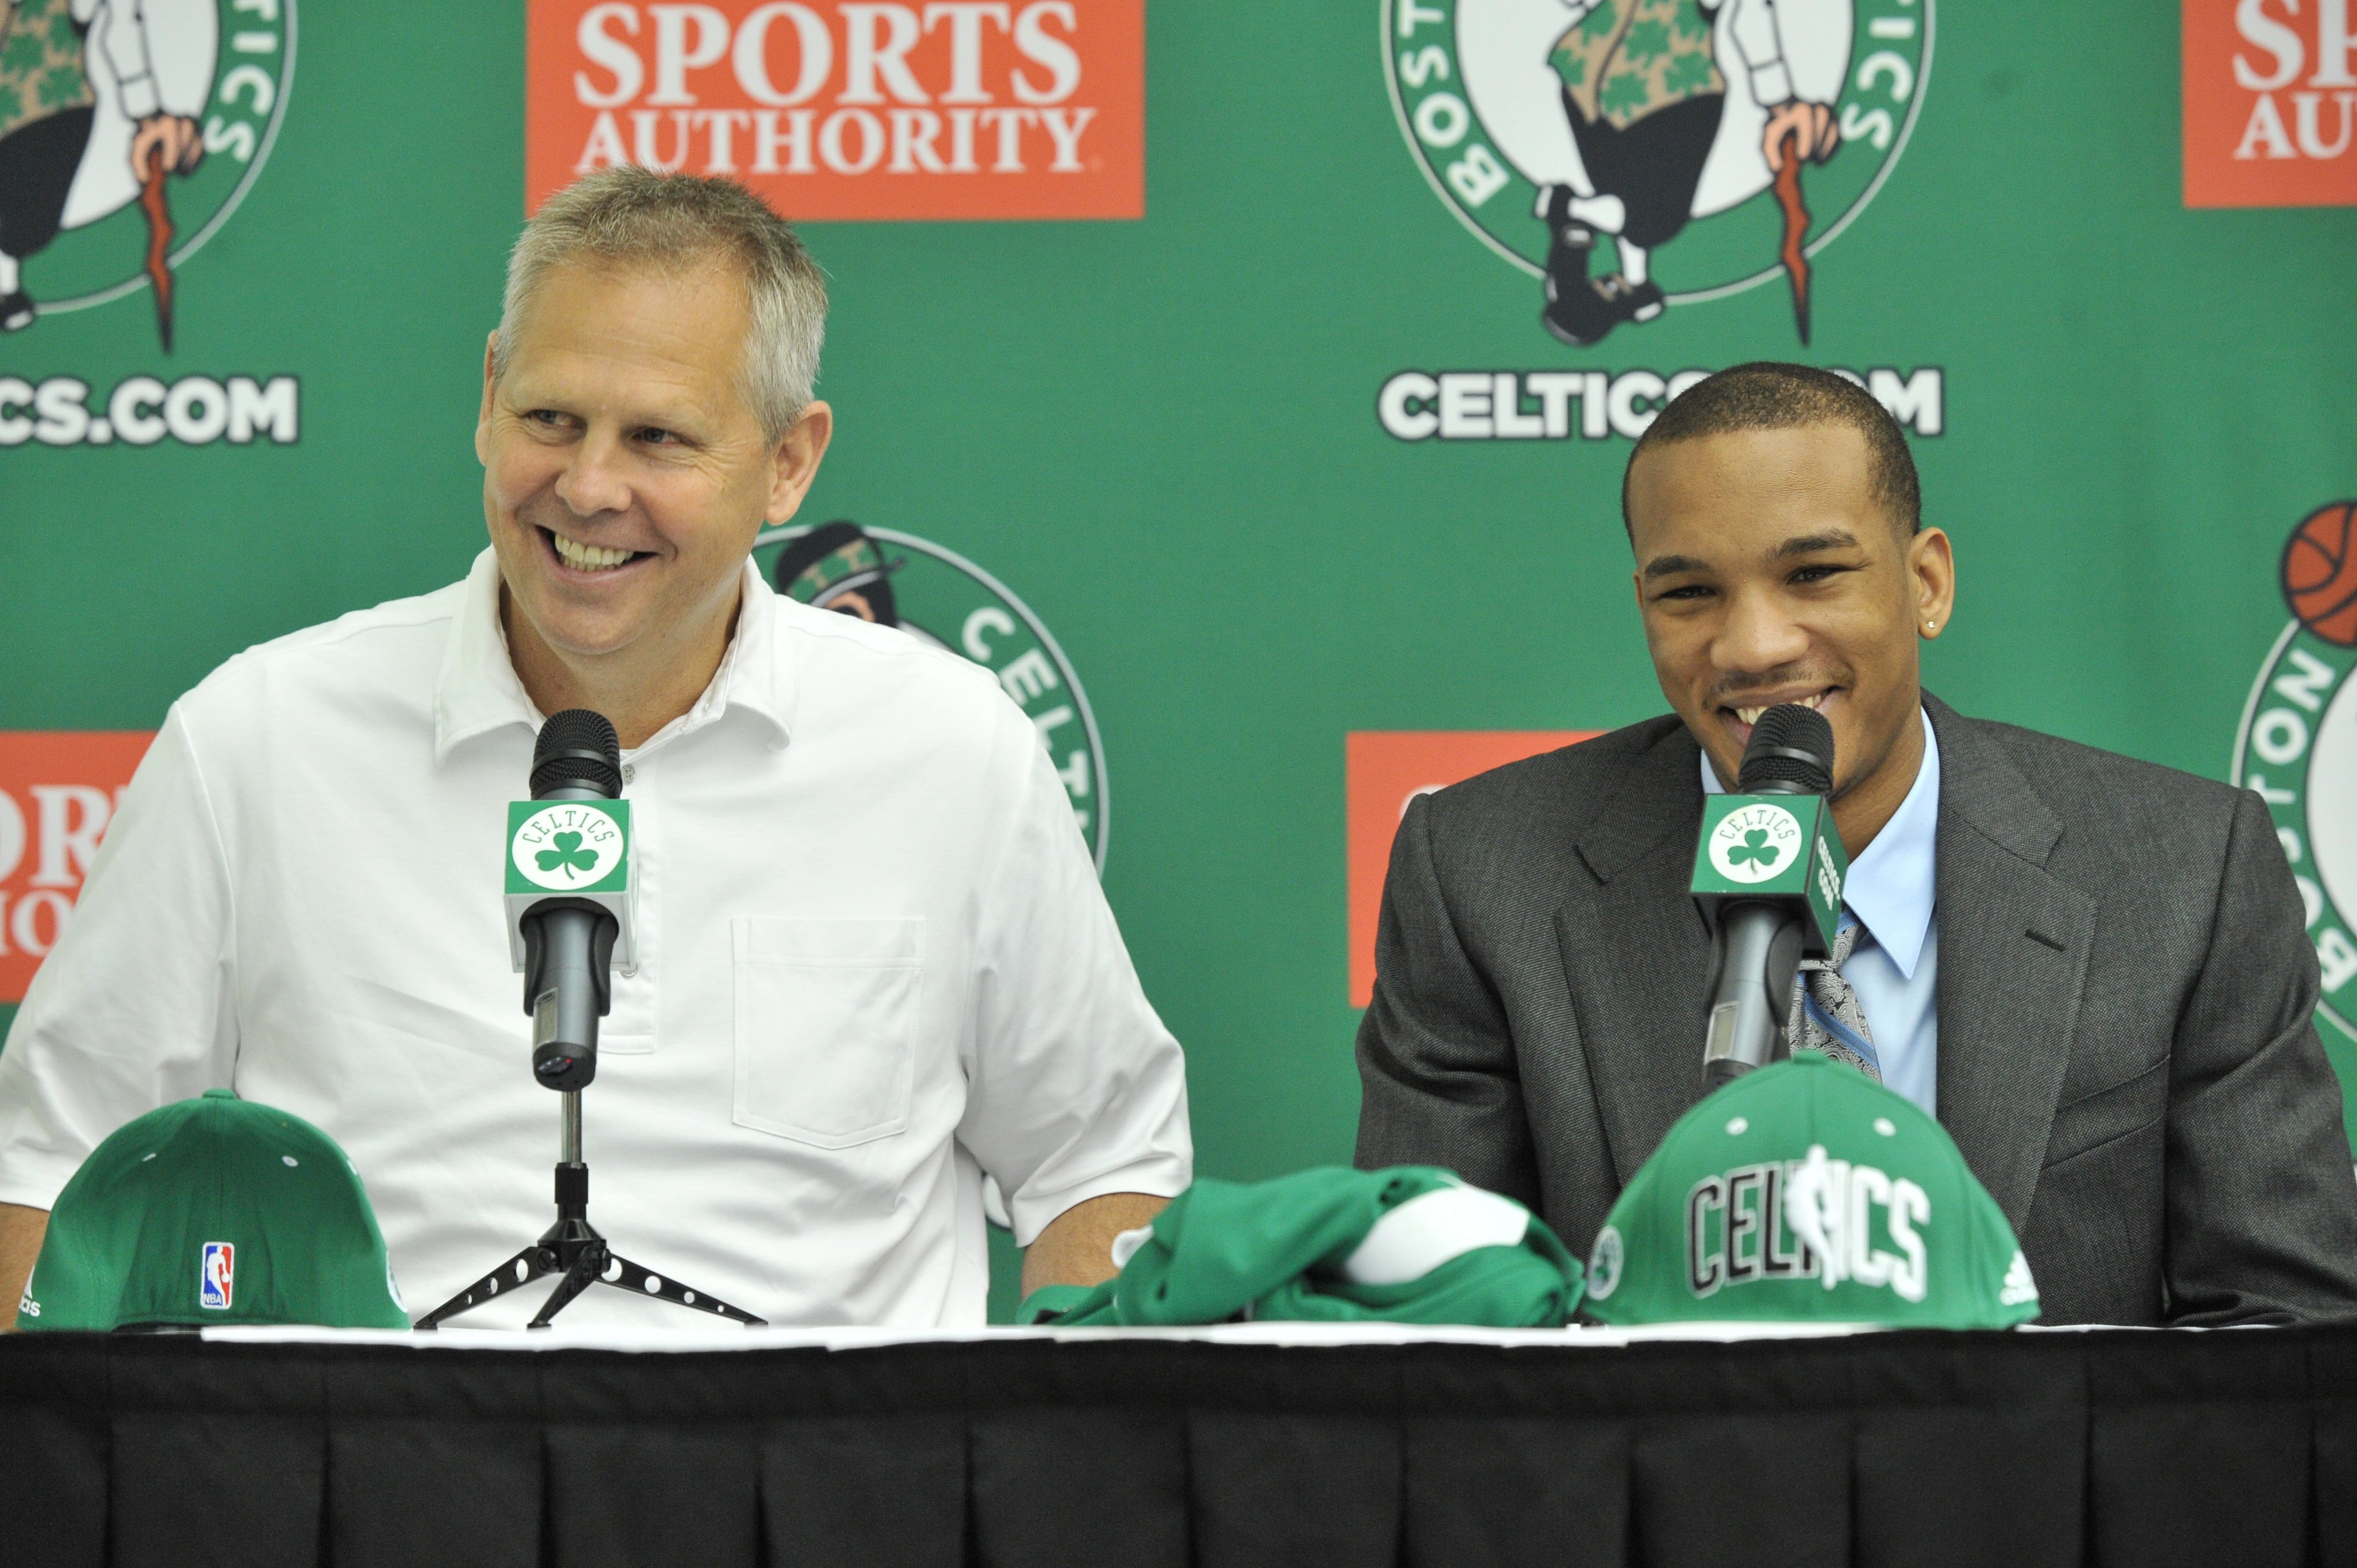 General Manager Danny Ainge introduces Avery Bradley during a press conference. (Photo by Brian Babineau/NBAE via Getty Images)